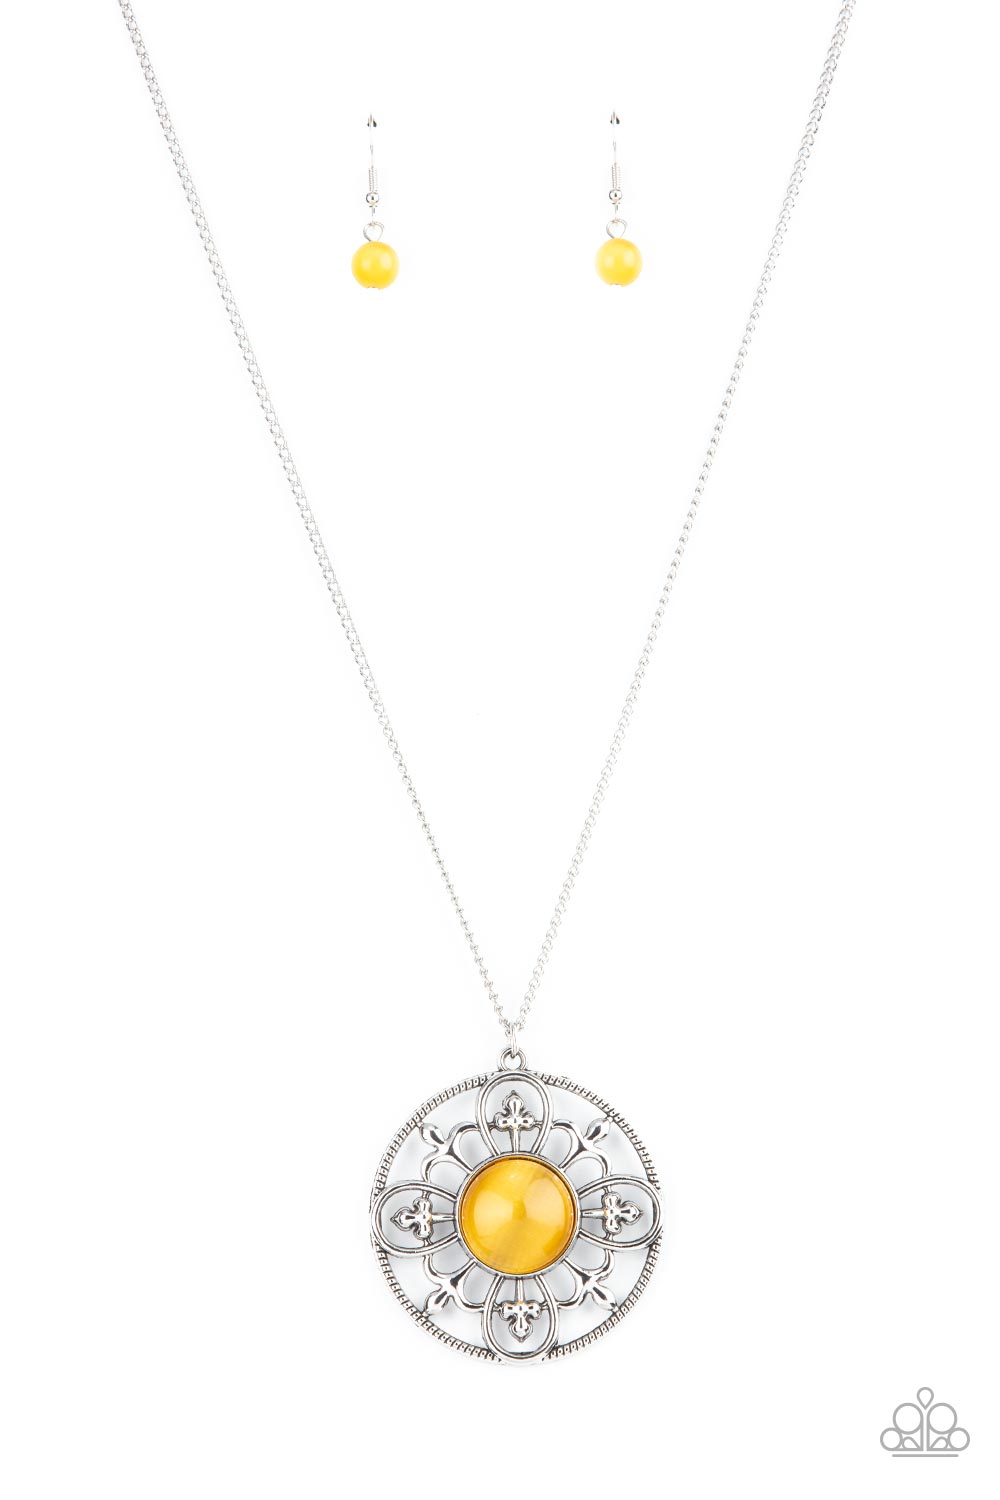 Celestial Compass Yellow Cat's Eye Stone Necklace - Paparazzi Accessories- lightbox - CarasShop.com - $5 Jewelry by Cara Jewels